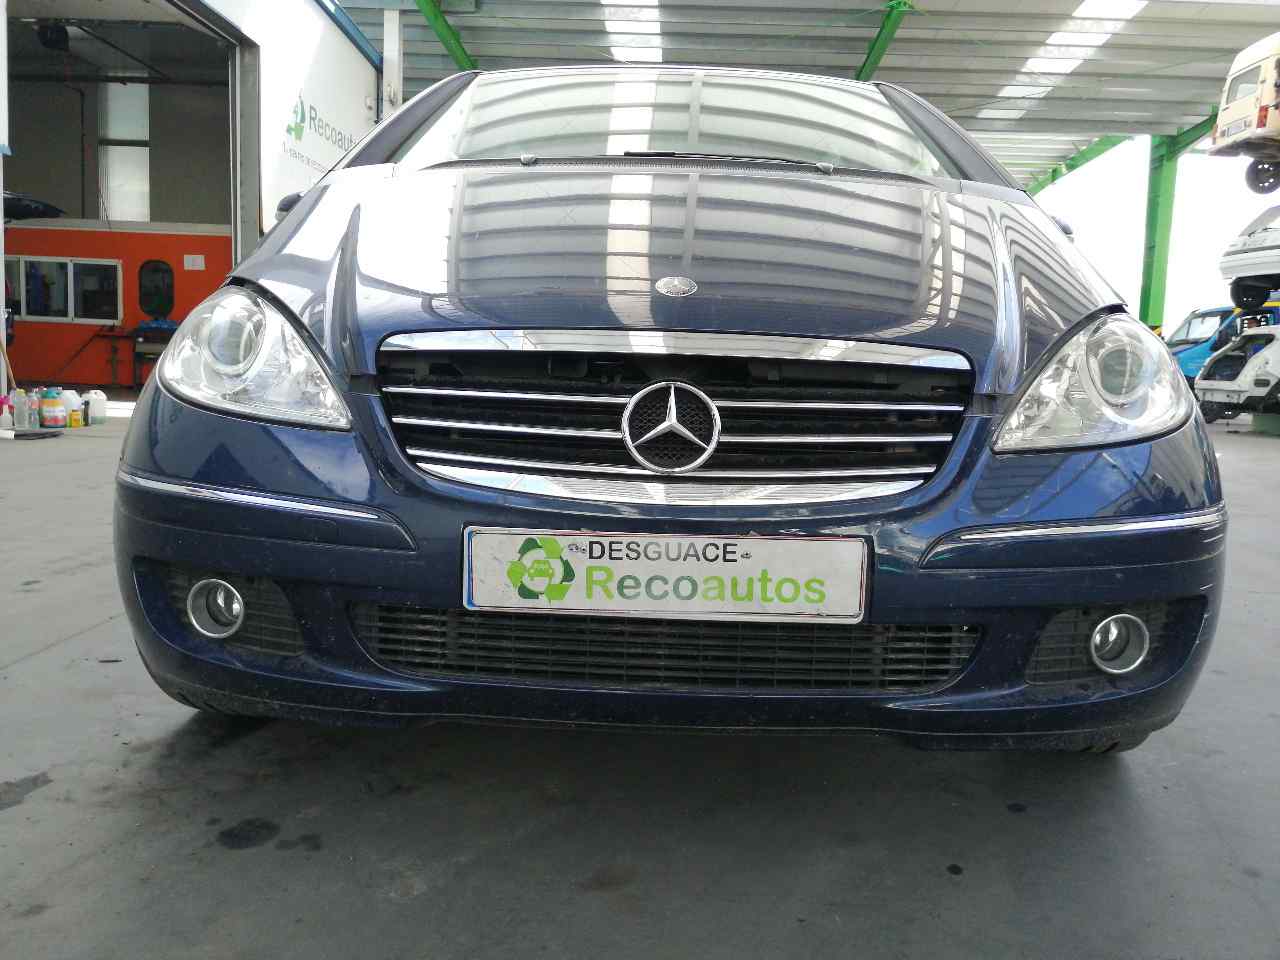 MERCEDES-BENZ A-Class W169 (2004-2012) Other Body Parts A1693000304 19900885